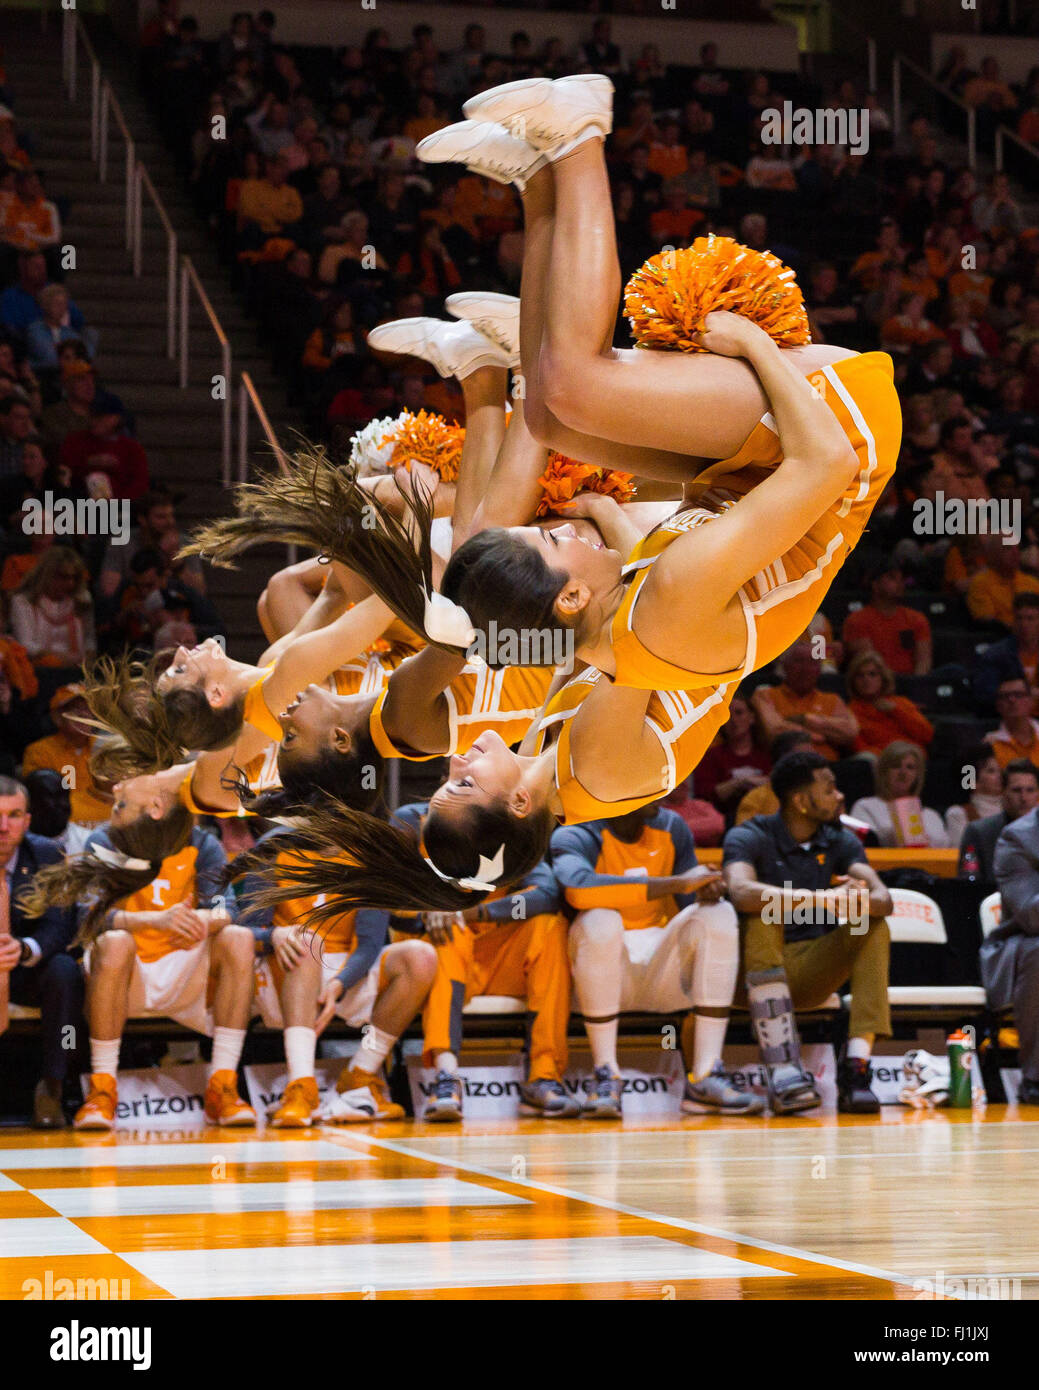 February 27, 2016: Tennessee Volunteers cheerleaders during the NCAA basketball game between the University of Tennessee Volunteers and the University of Arkansas Razorbacks at Thompson Boling Arena in Knoxville TN Tim Gangloff/CSM Stock Photo